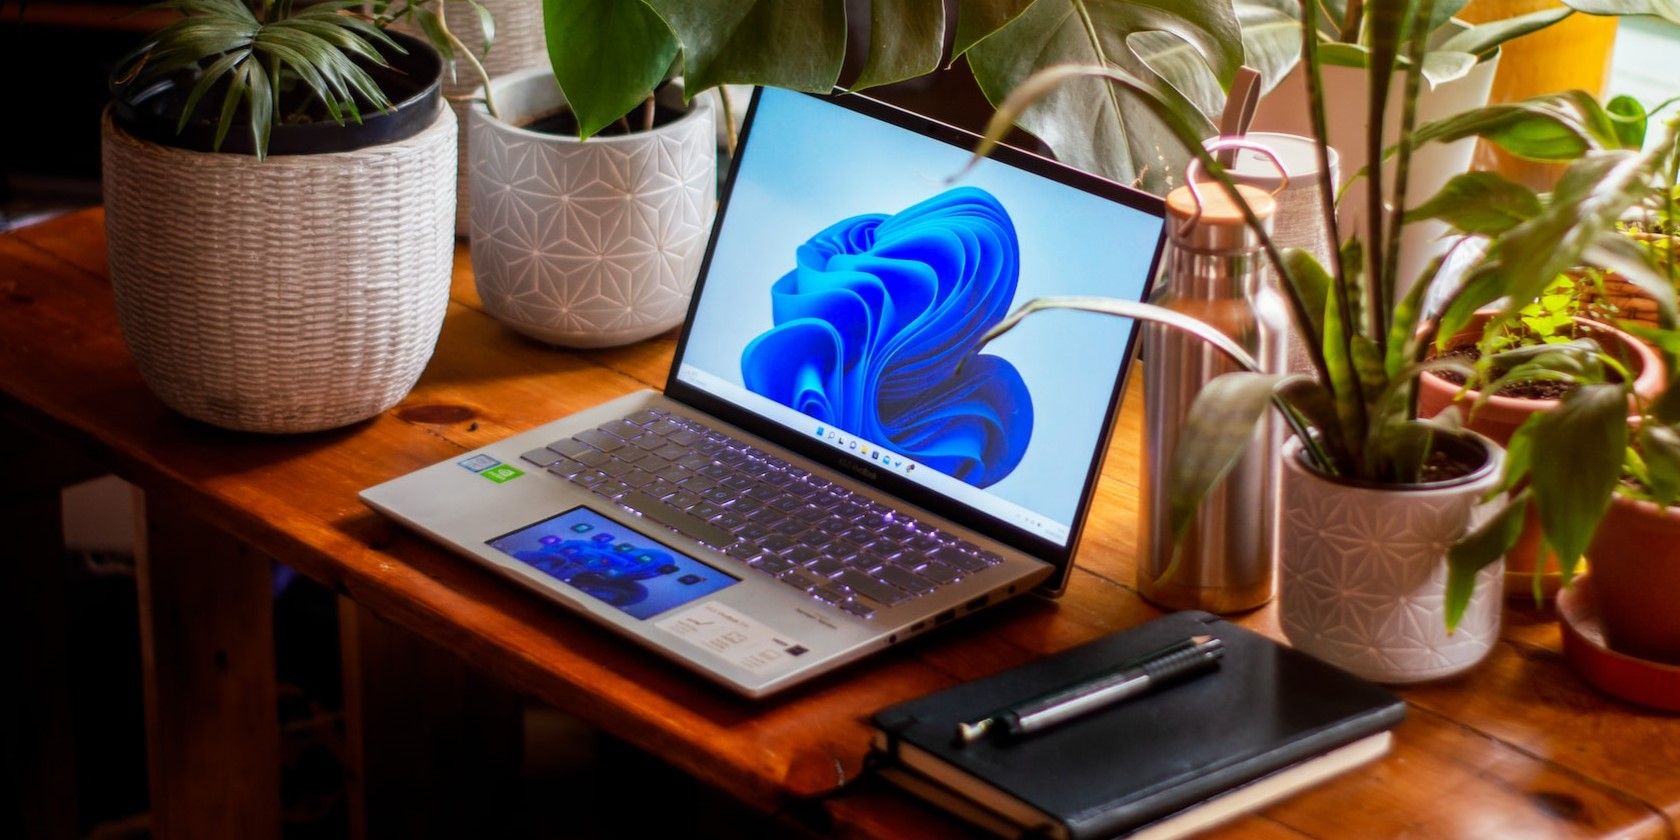 A silver Windows 11 laptop on a wooden table